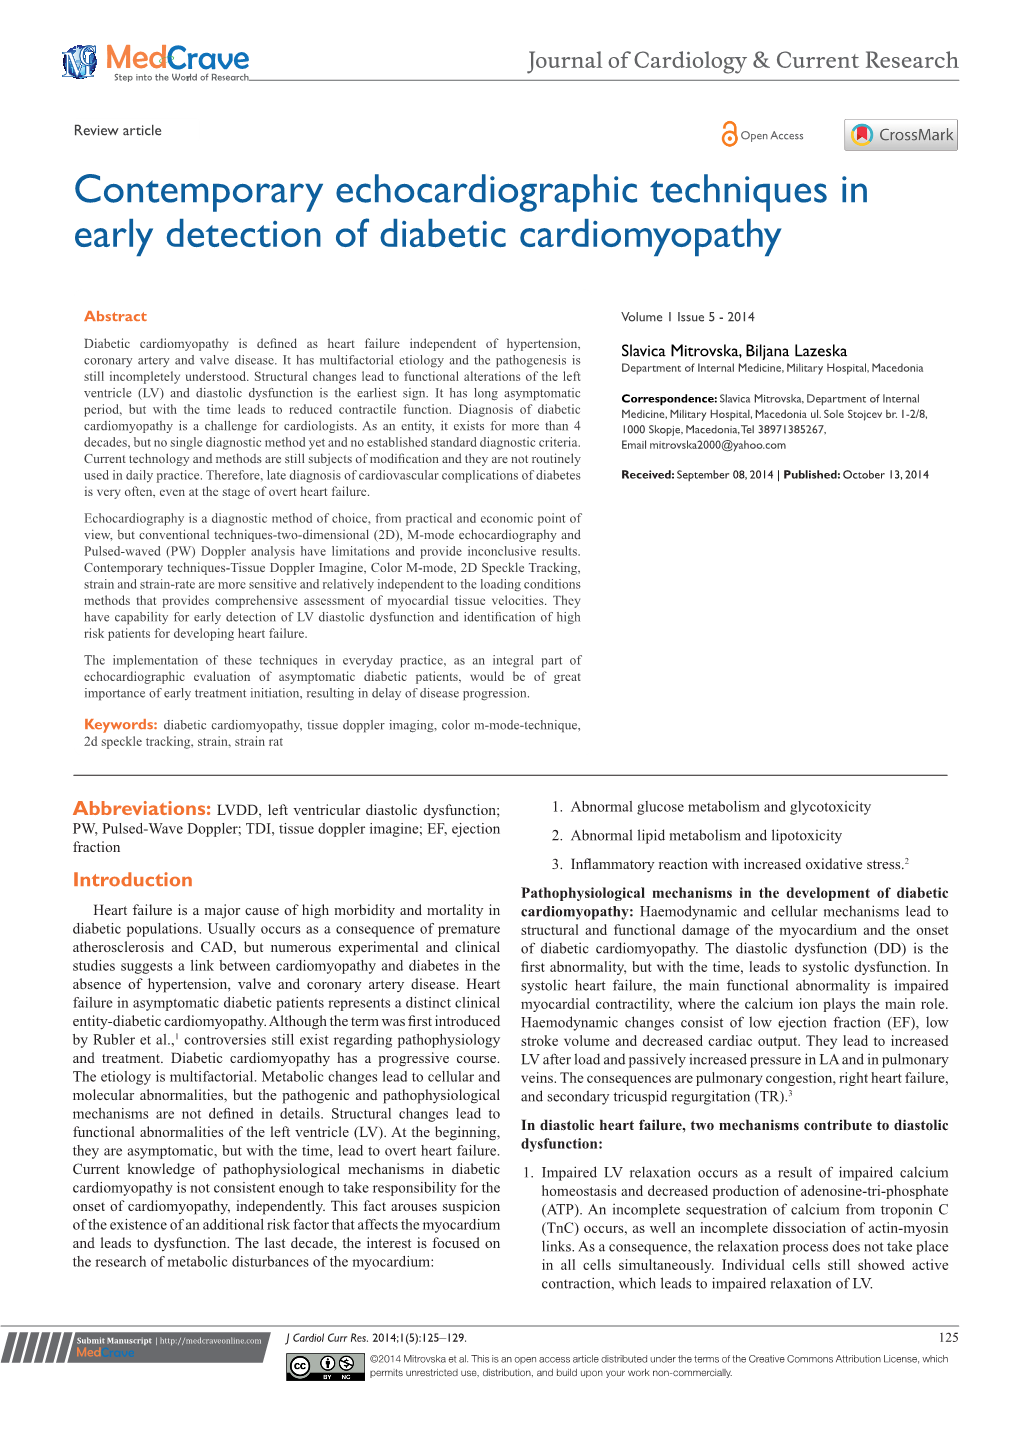 Contemporary Echocardiographic Techniques in Early Detection of Diabetic Cardiomyopathy